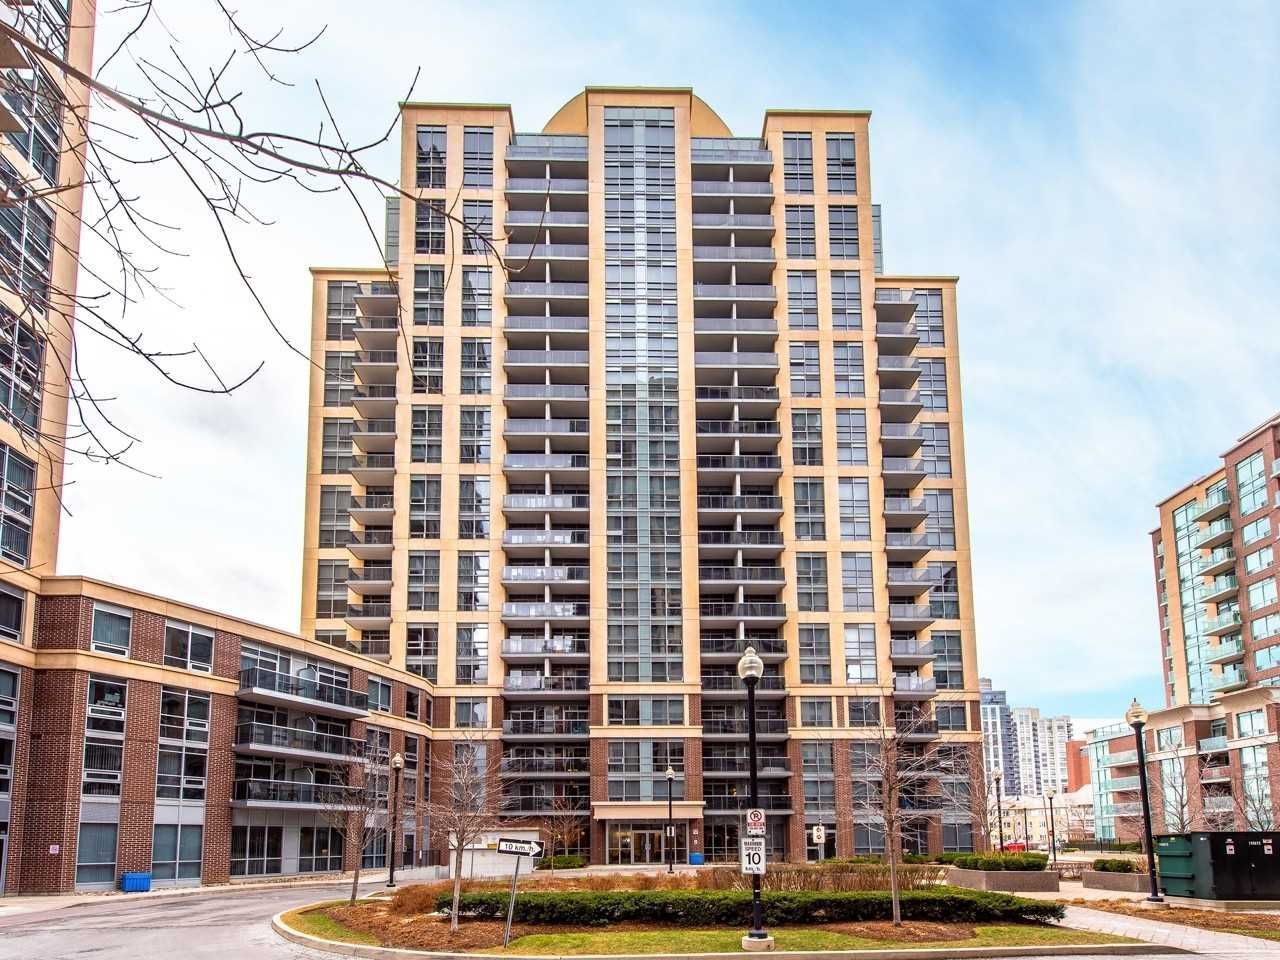 1 Michael Power Place. Vivid Condos is located in  Etobicoke, Toronto - image #1 of 3